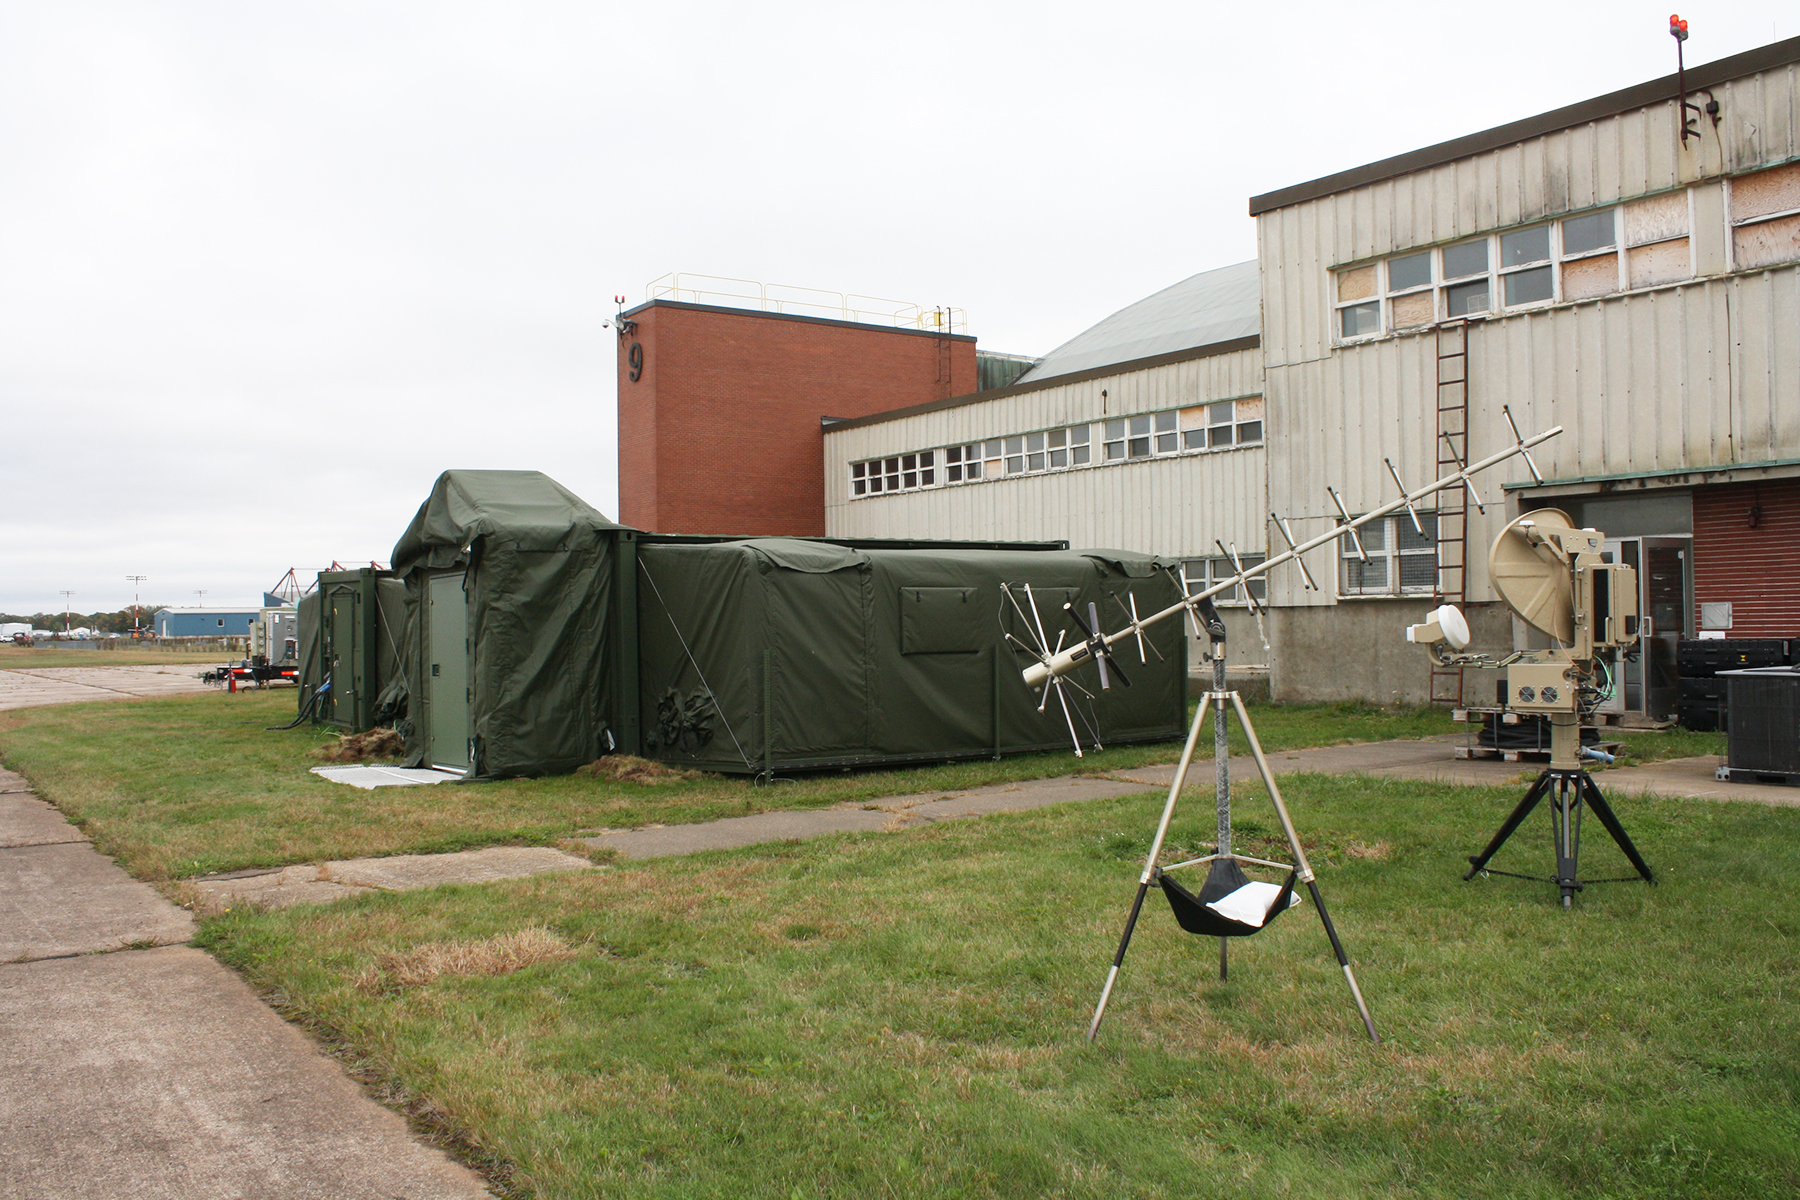 A large olive-green tent sits on the grass alongside a building.